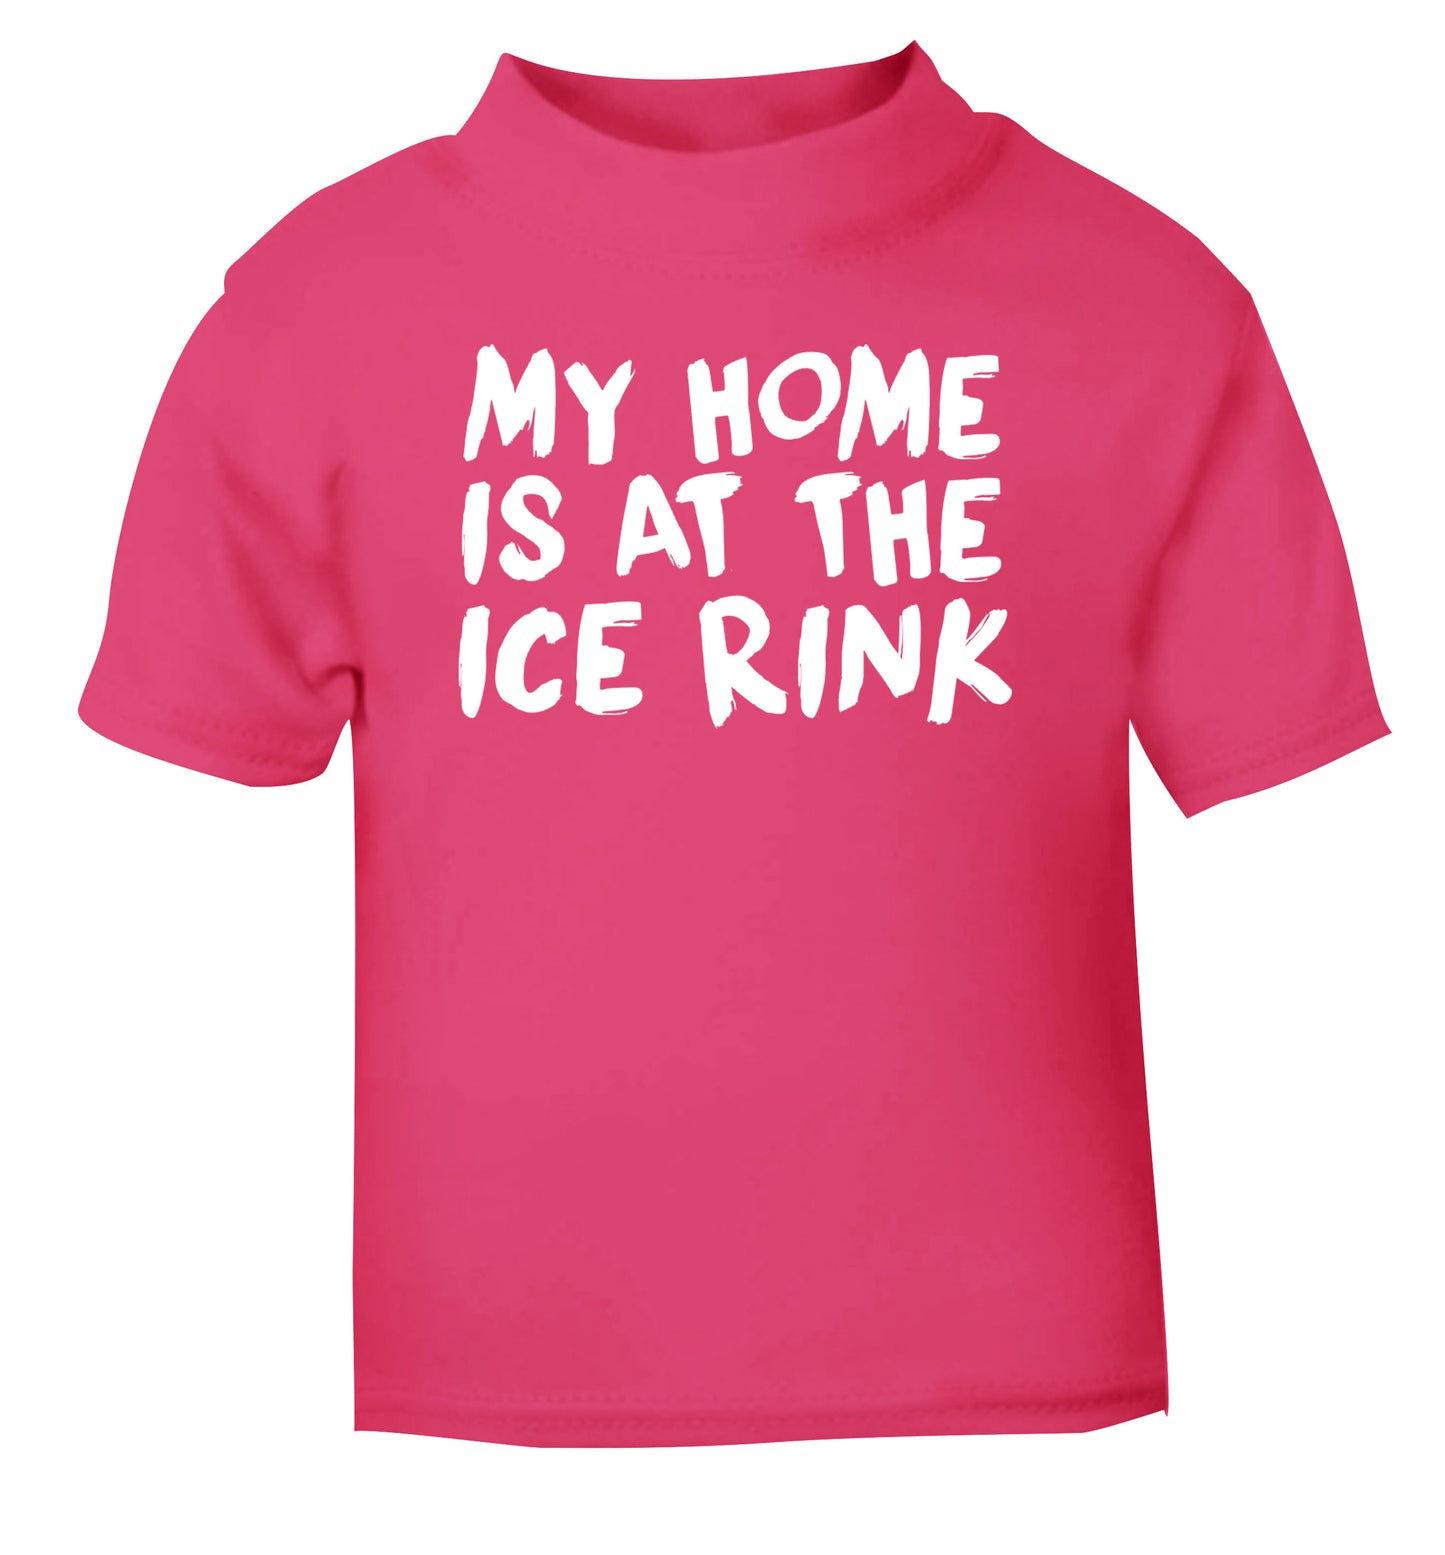 My home is at the ice rink pink Baby Toddler Tshirt 2 Years